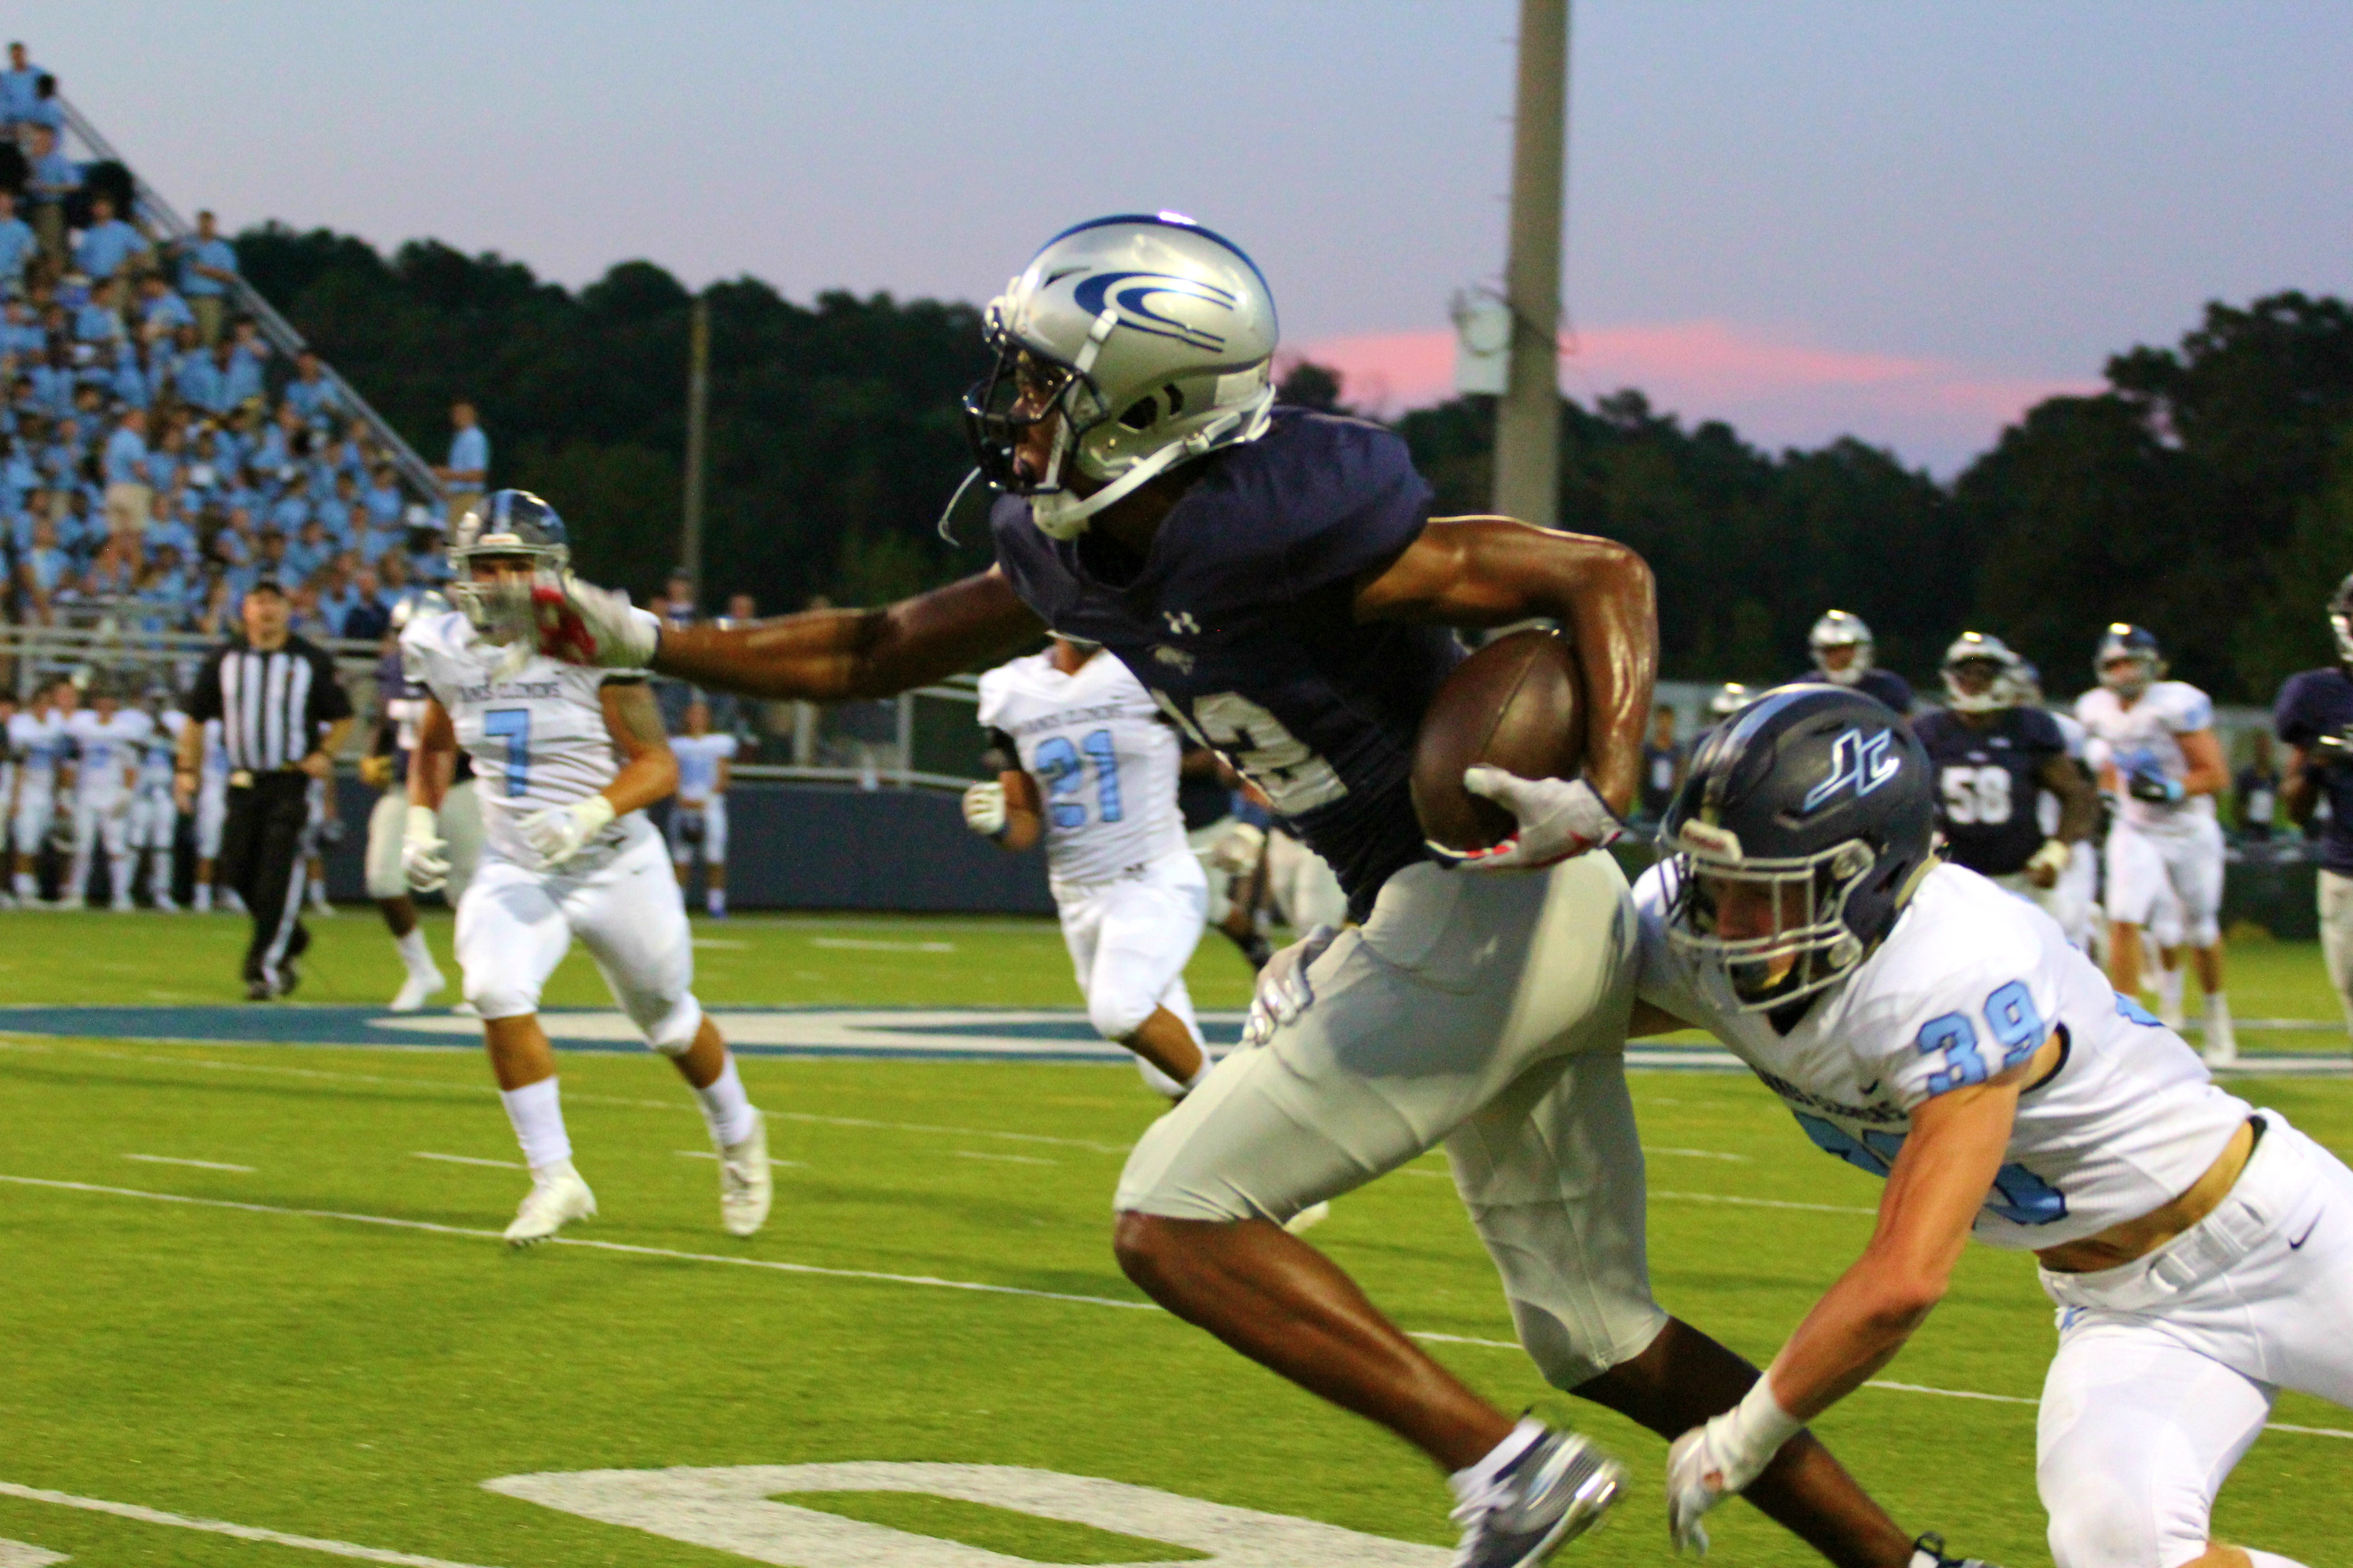 Class 6A Bracket: Clay-Chalkville faces tough test against one-loss Helena to open playoffs